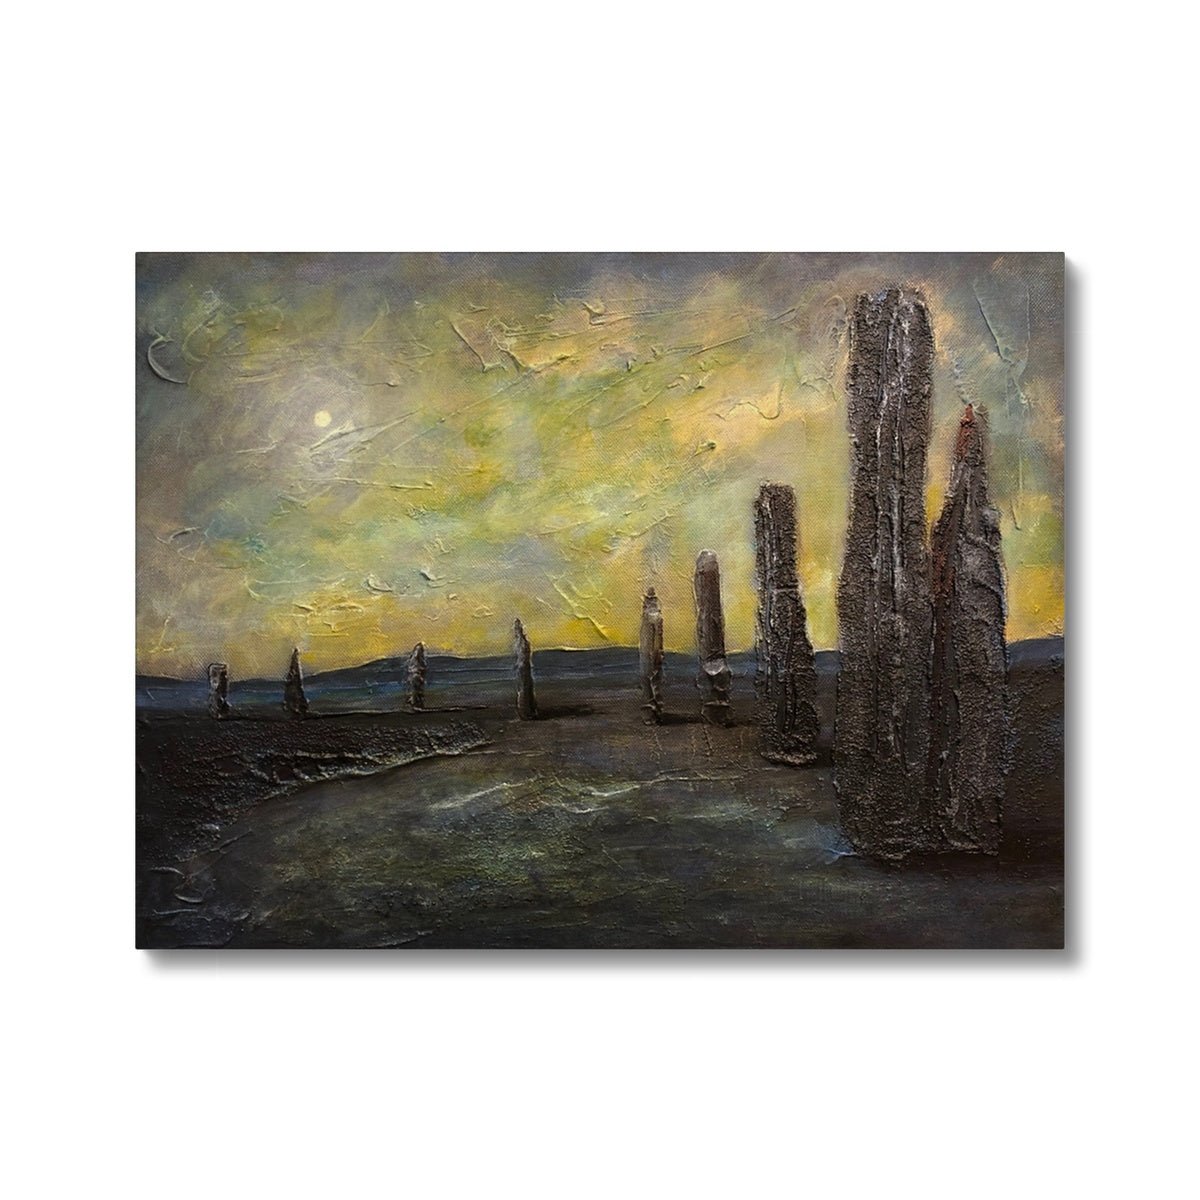 An Ethereal Ring Of Brodgar Orkney Painting | Canvas From Scotland-Contemporary Stretched Canvas Prints-Orkney Art Gallery-24"x18"-Paintings, Prints, Homeware, Art Gifts From Scotland By Scottish Artist Kevin Hunter